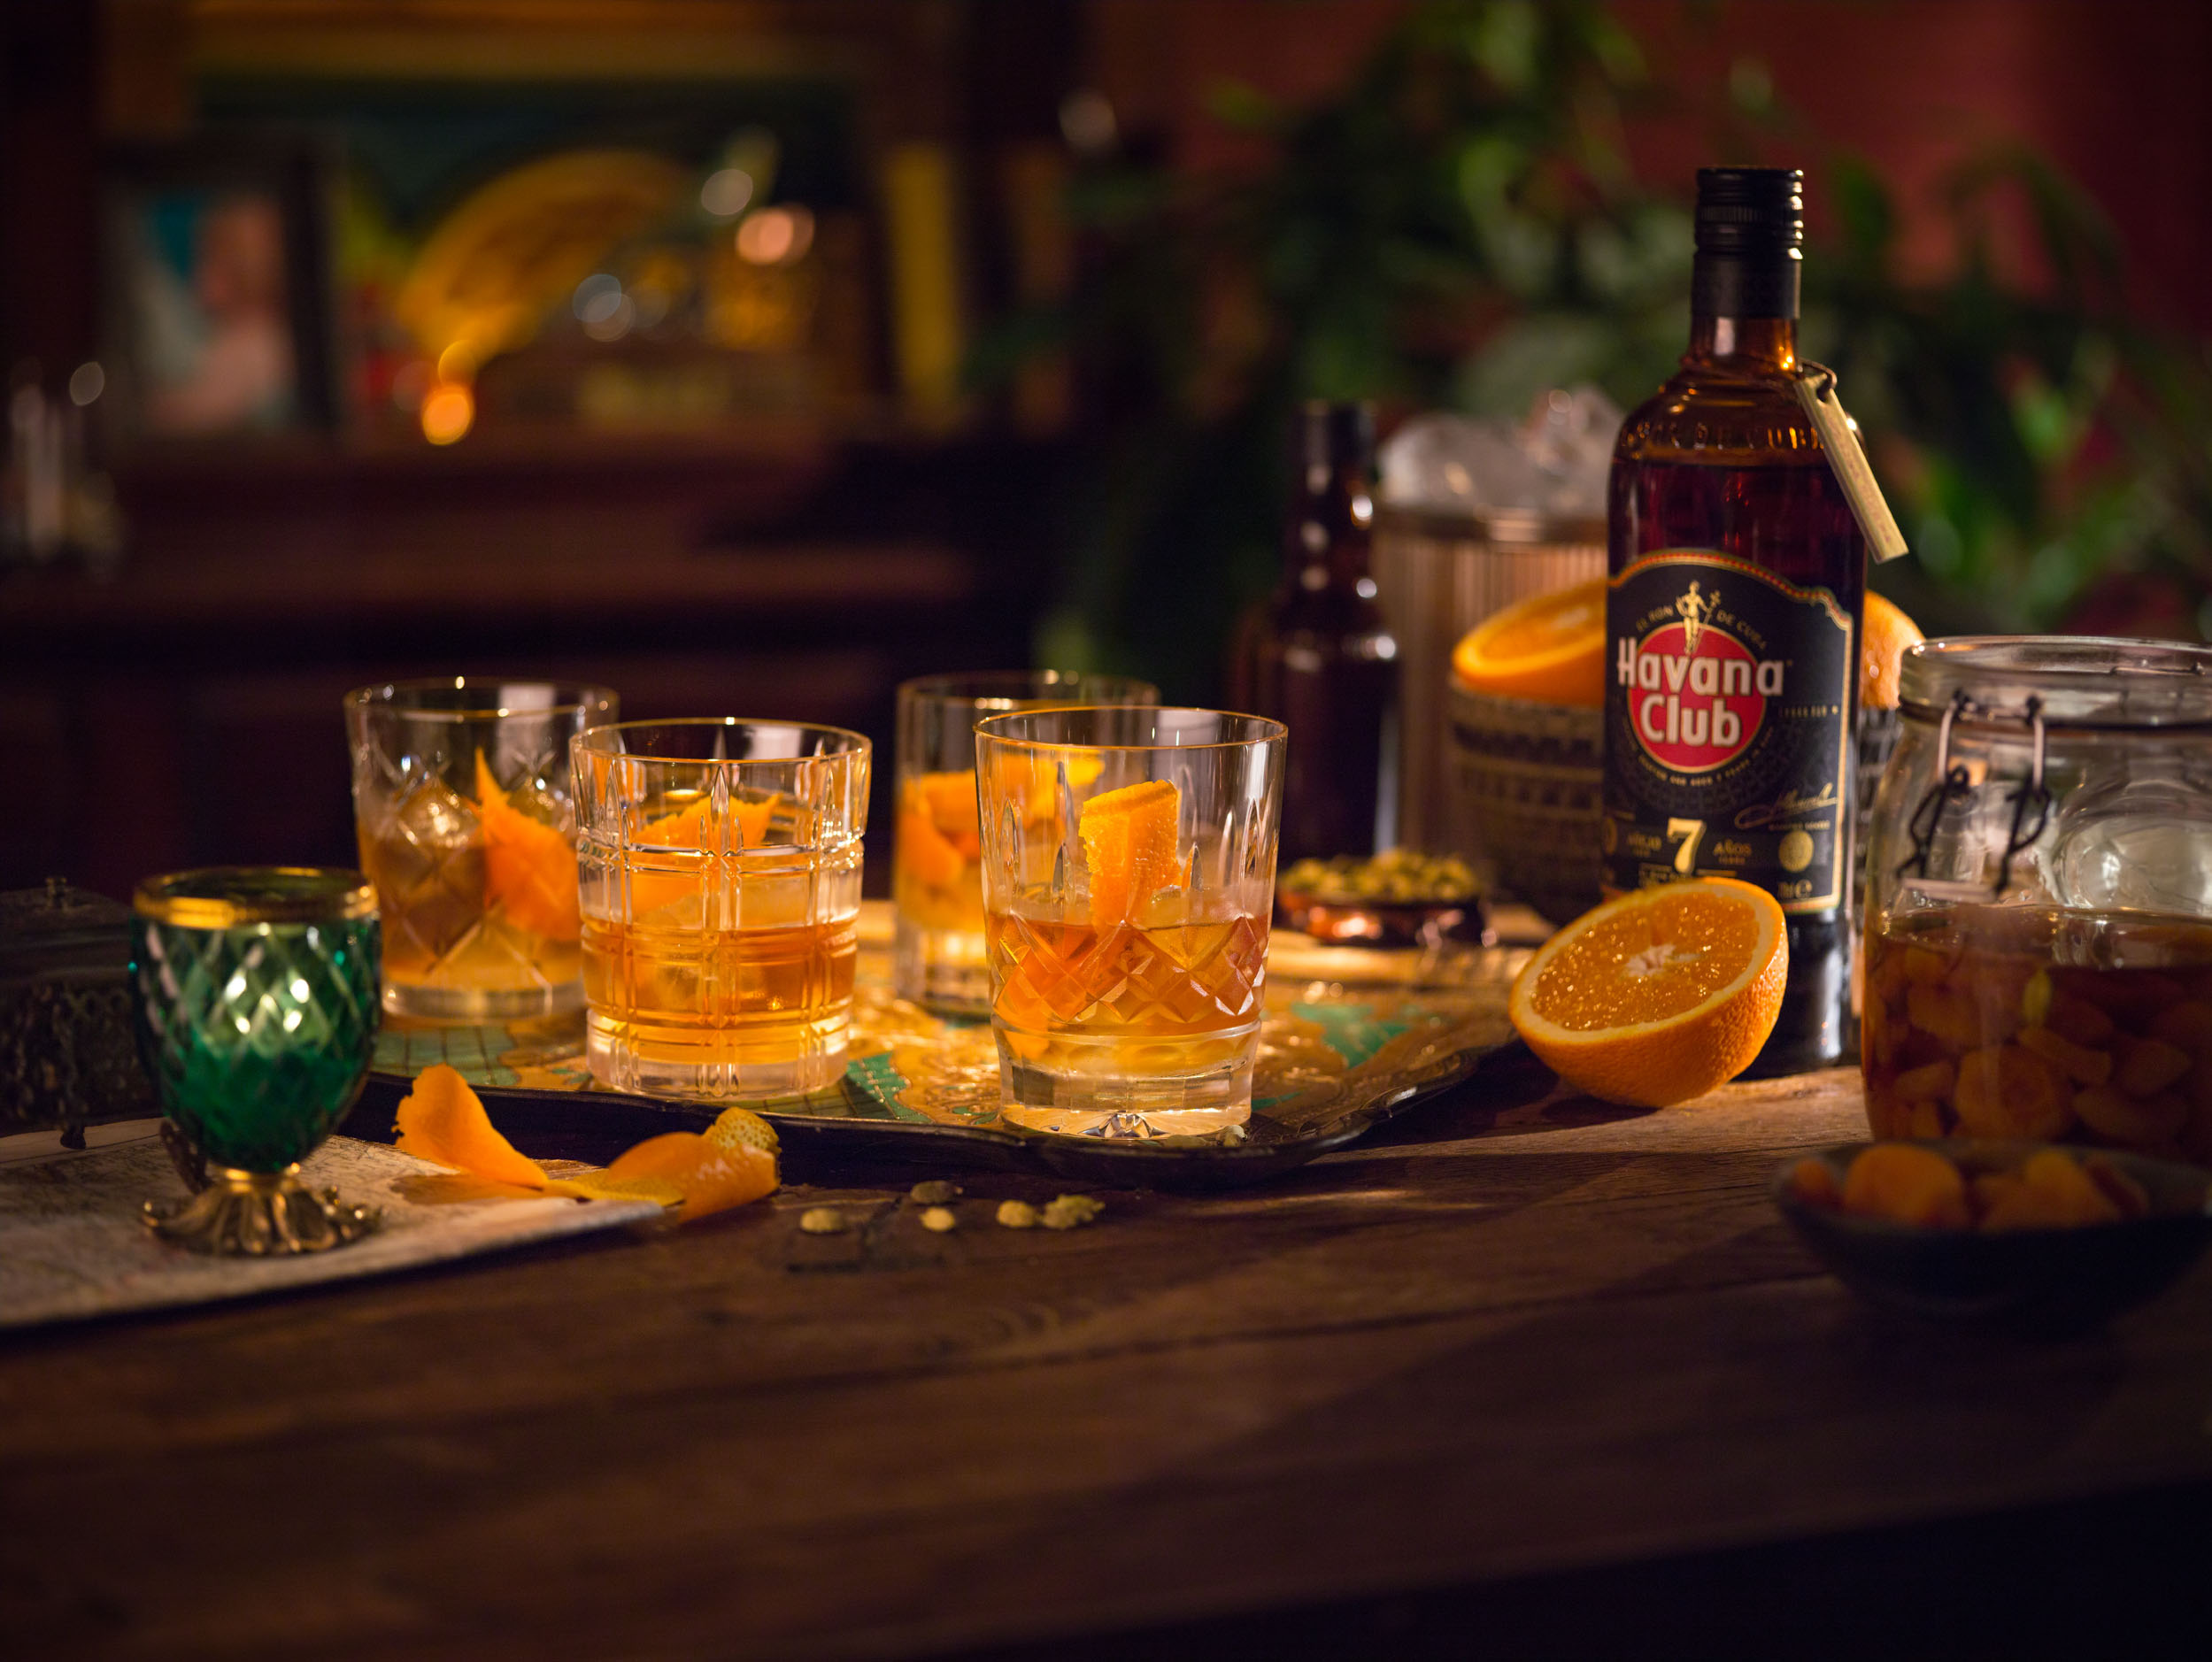 Pernod Ricard’s Havana Club Rum Appoints Impero as New Key Strategic and Creative Partner